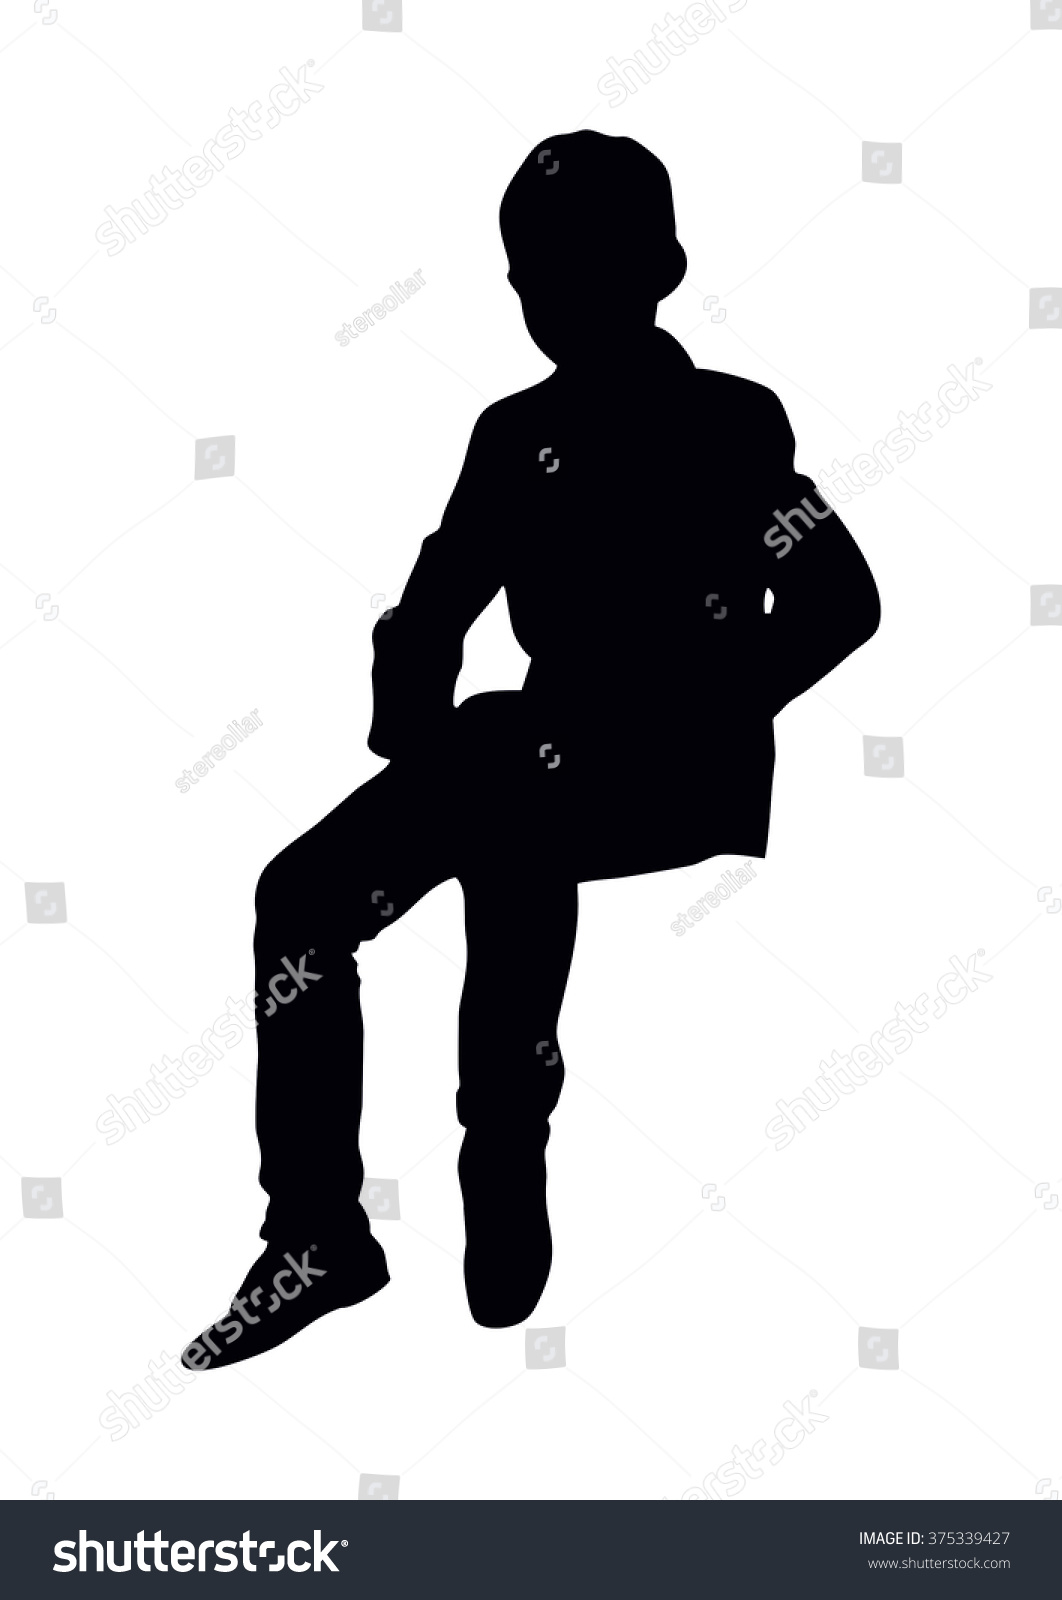 Sitting Boys Silhouette Stock Vector (Royalty Free) 375339427 ...